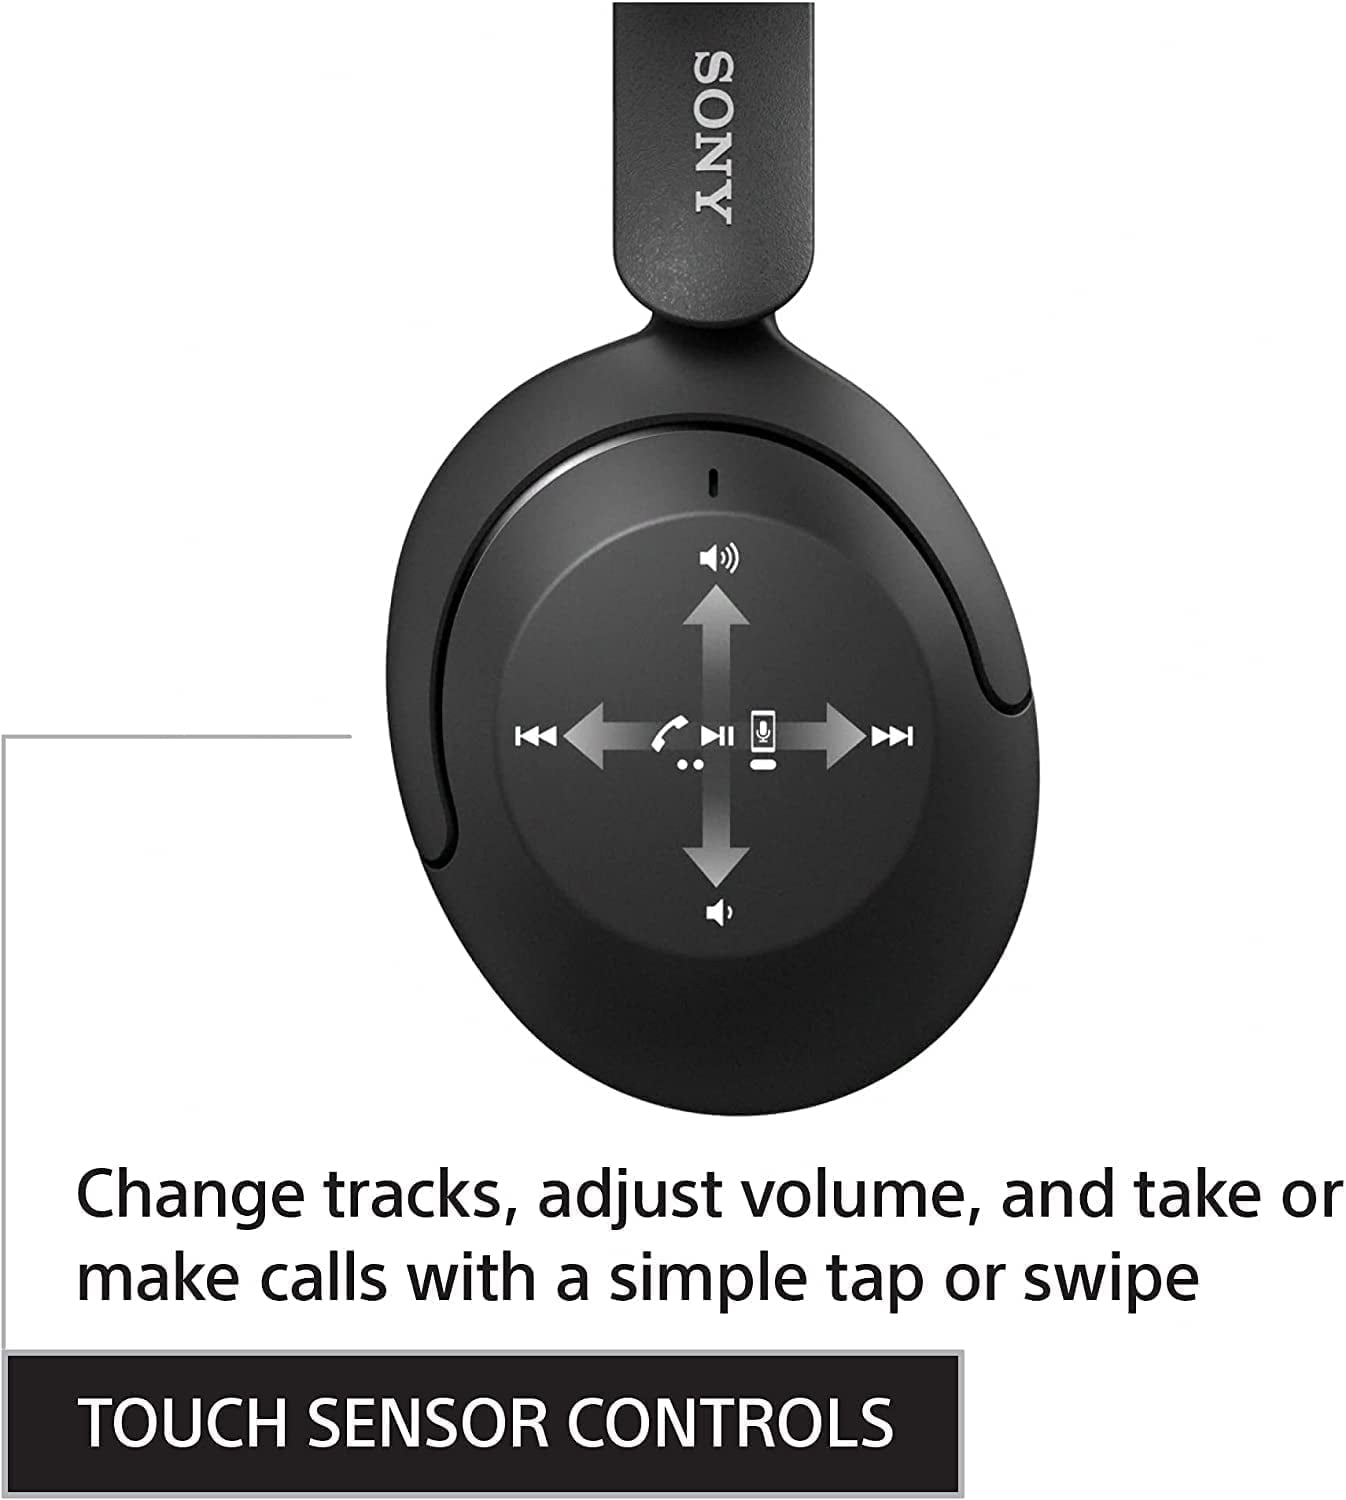  Sony WH-XB910N Extra BASS Noise Cancelling Headphones, Wireless  Bluetooth Over The Ear Headset with Microphone and Alexa Voice Control,  Blue ( Exclusive) (Renewed) : Electronics